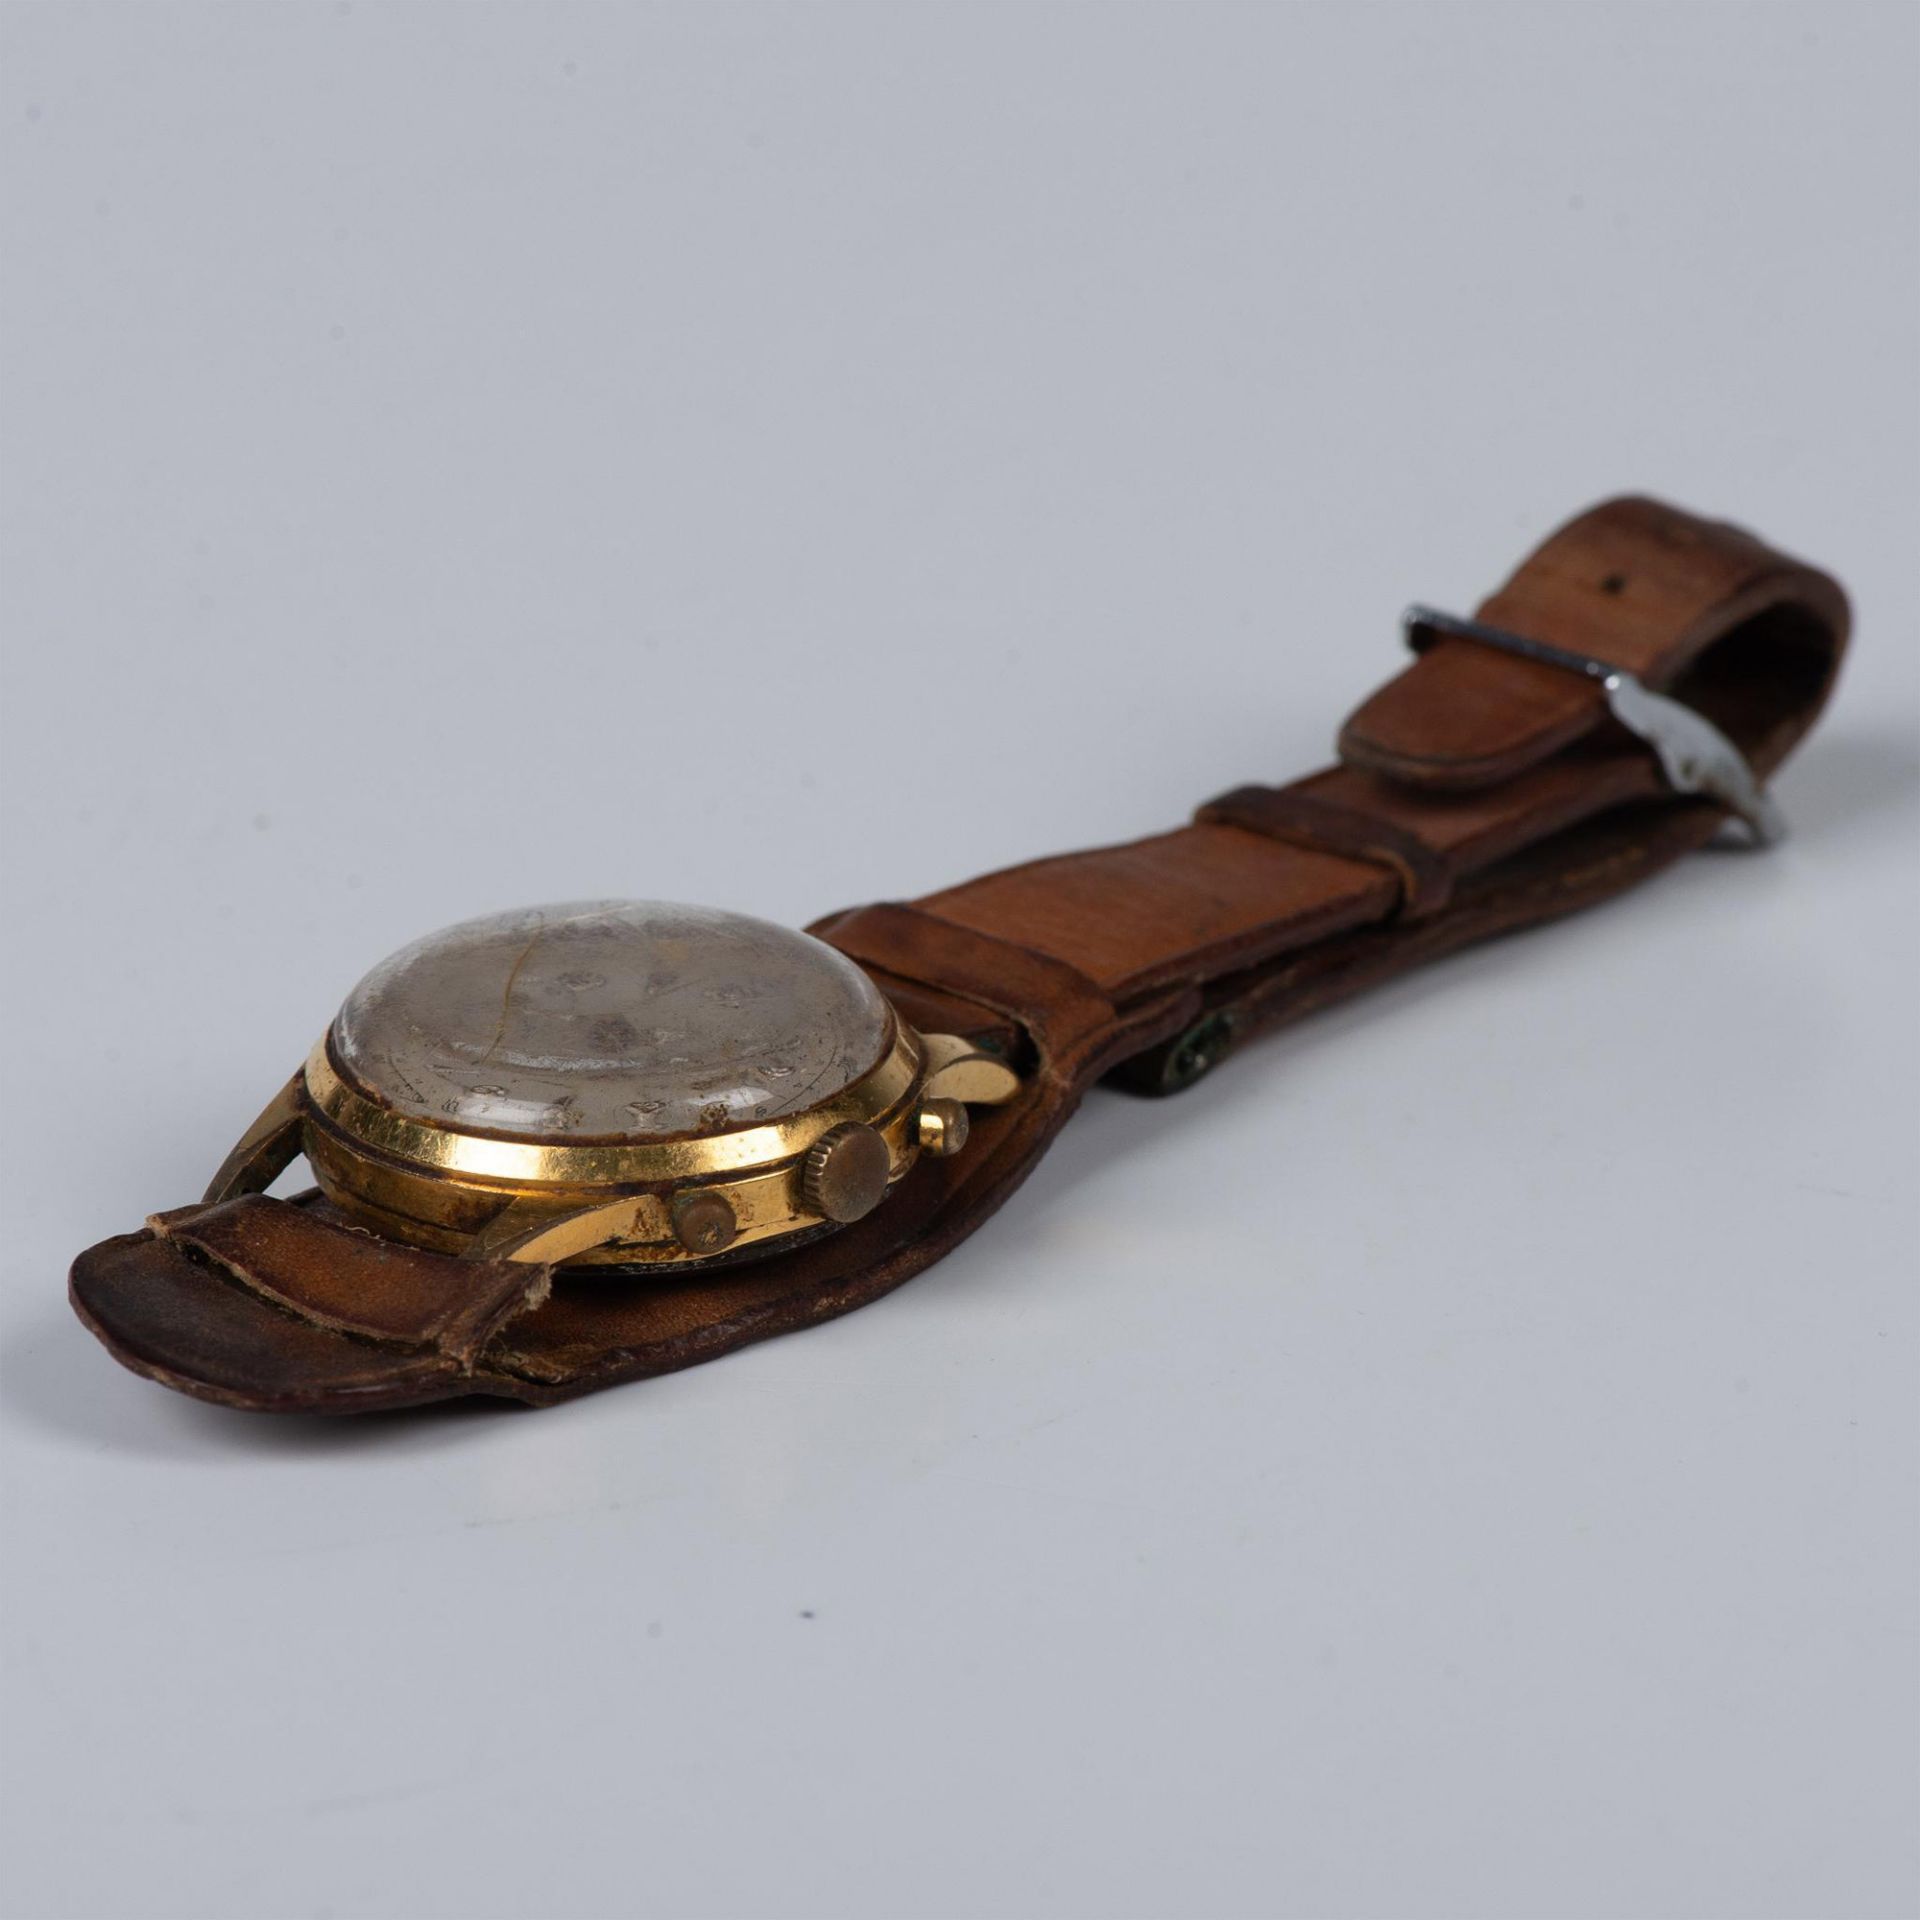 Gents 1950s/60s Favor Chronograph Wrist Watch - Image 5 of 7